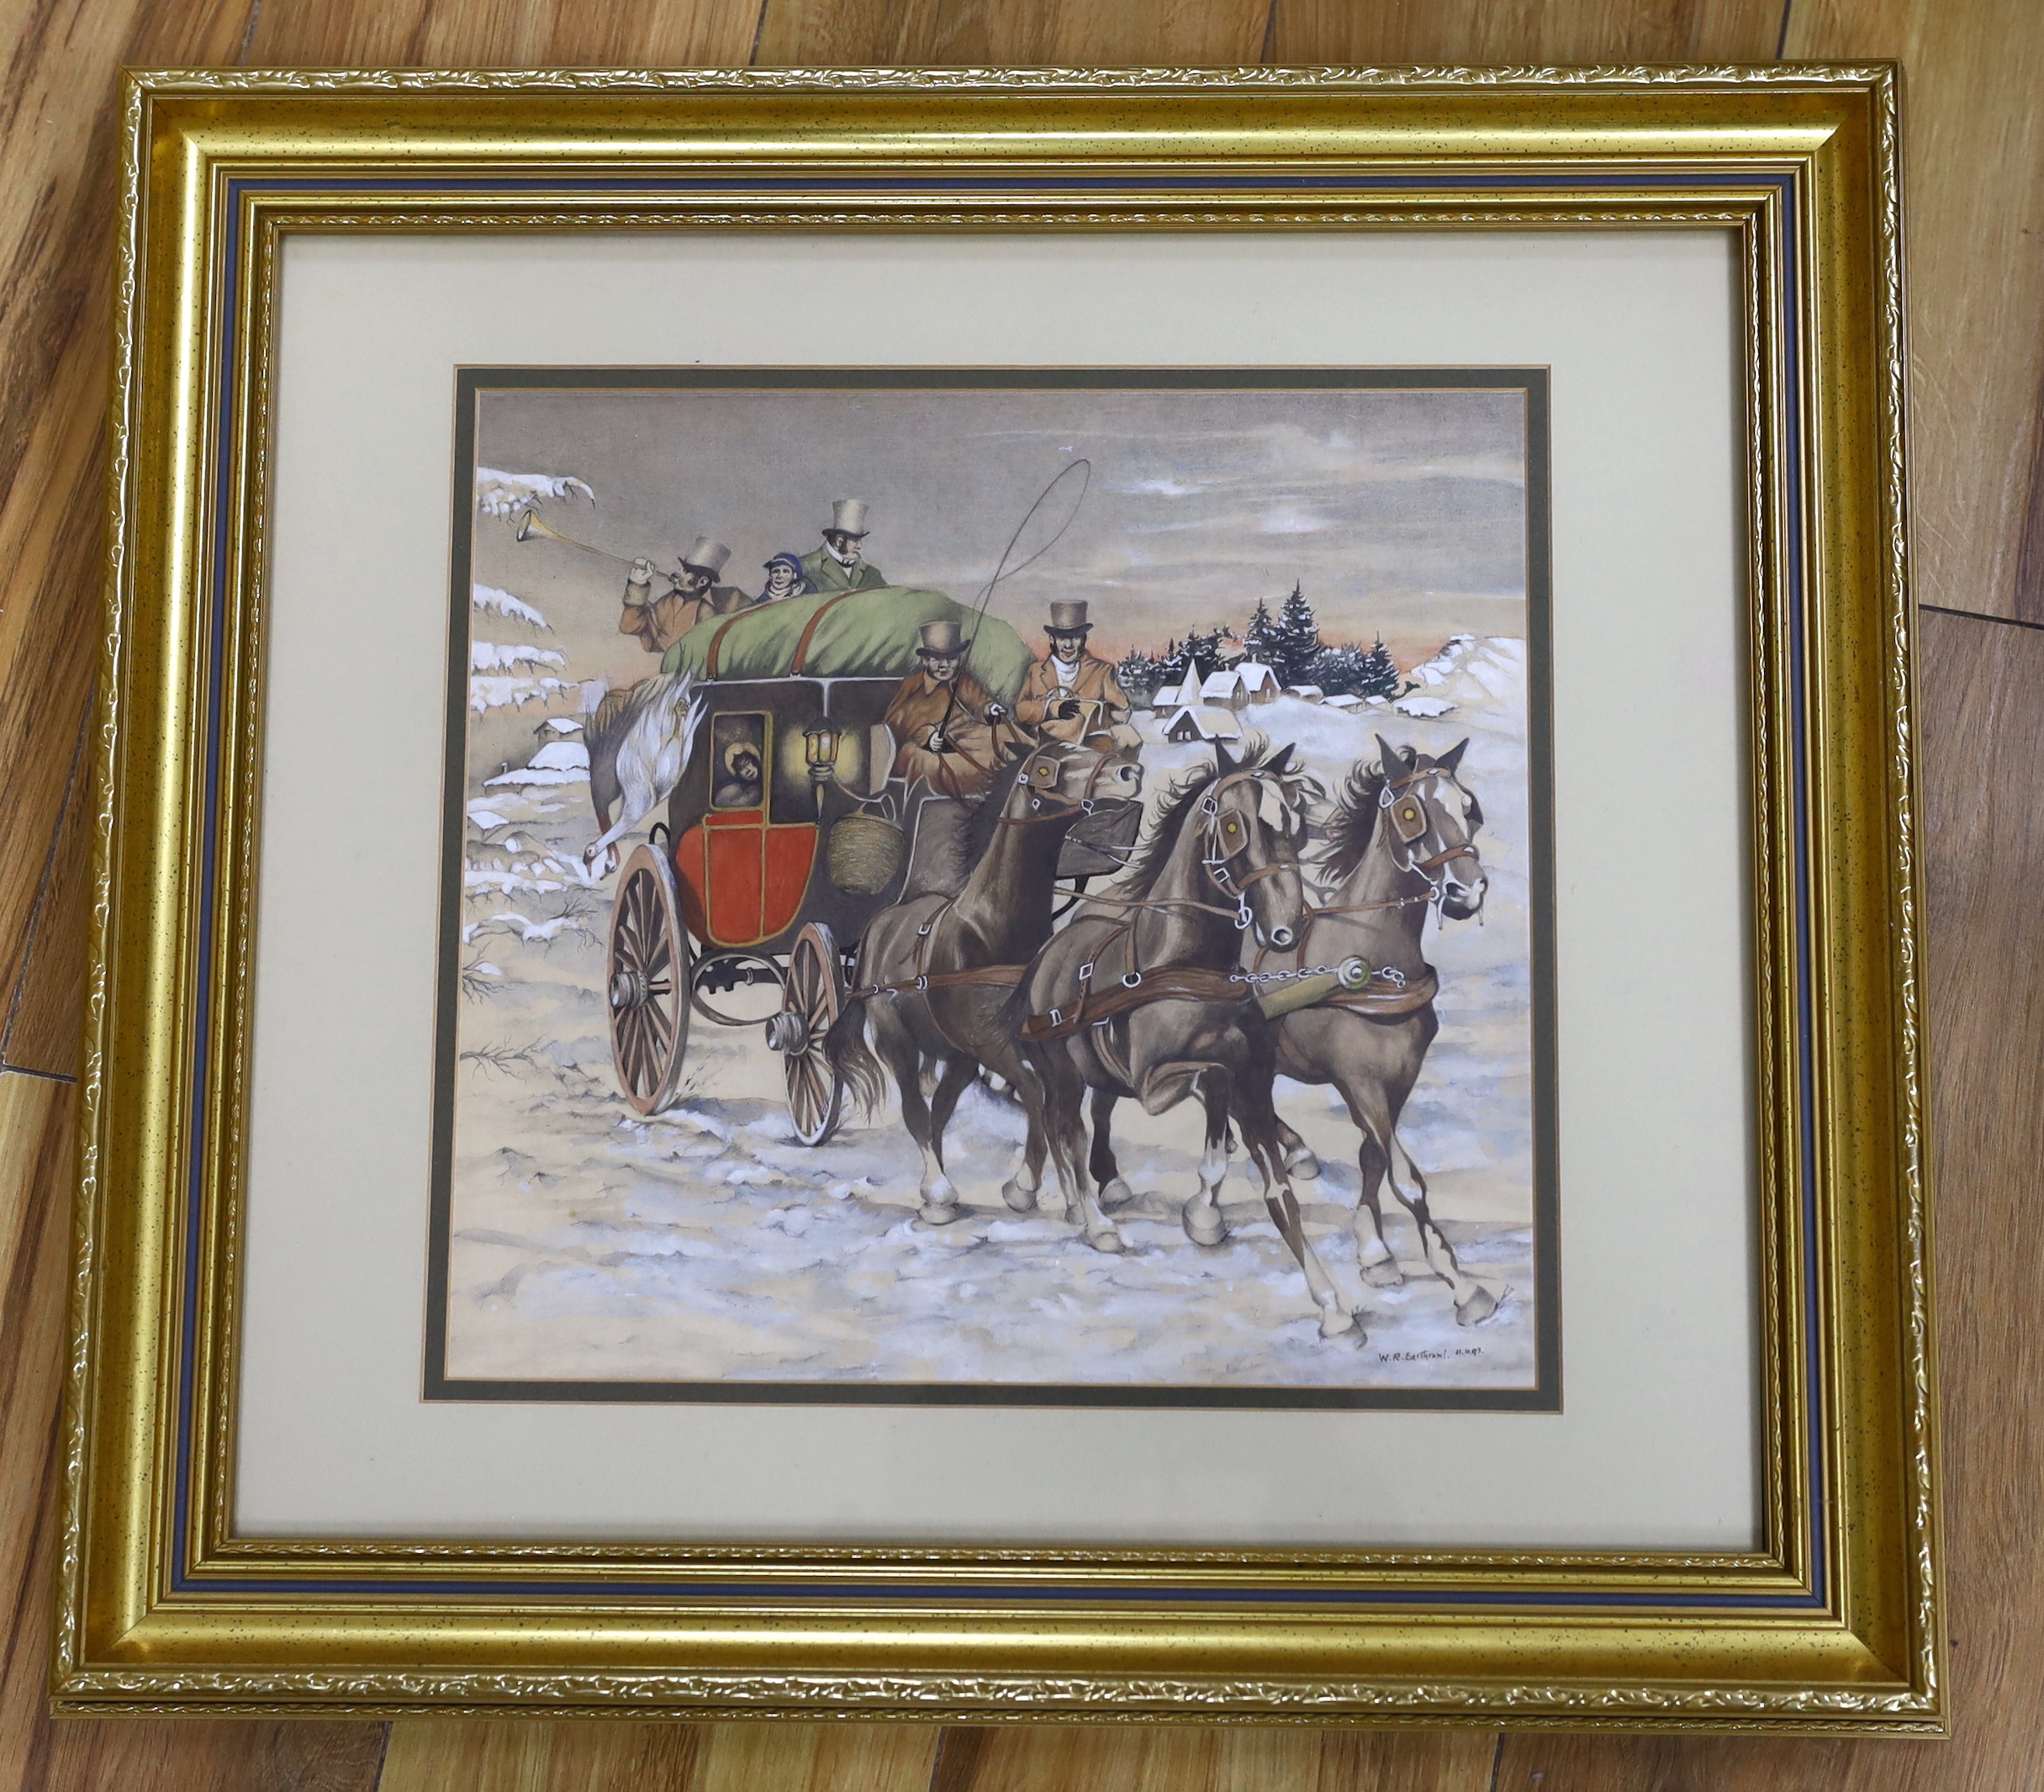 W.R Earthrowl (Modern British), watercolour, Stagecoach driving in winter landscape, signed and dated, 29 x 31cm